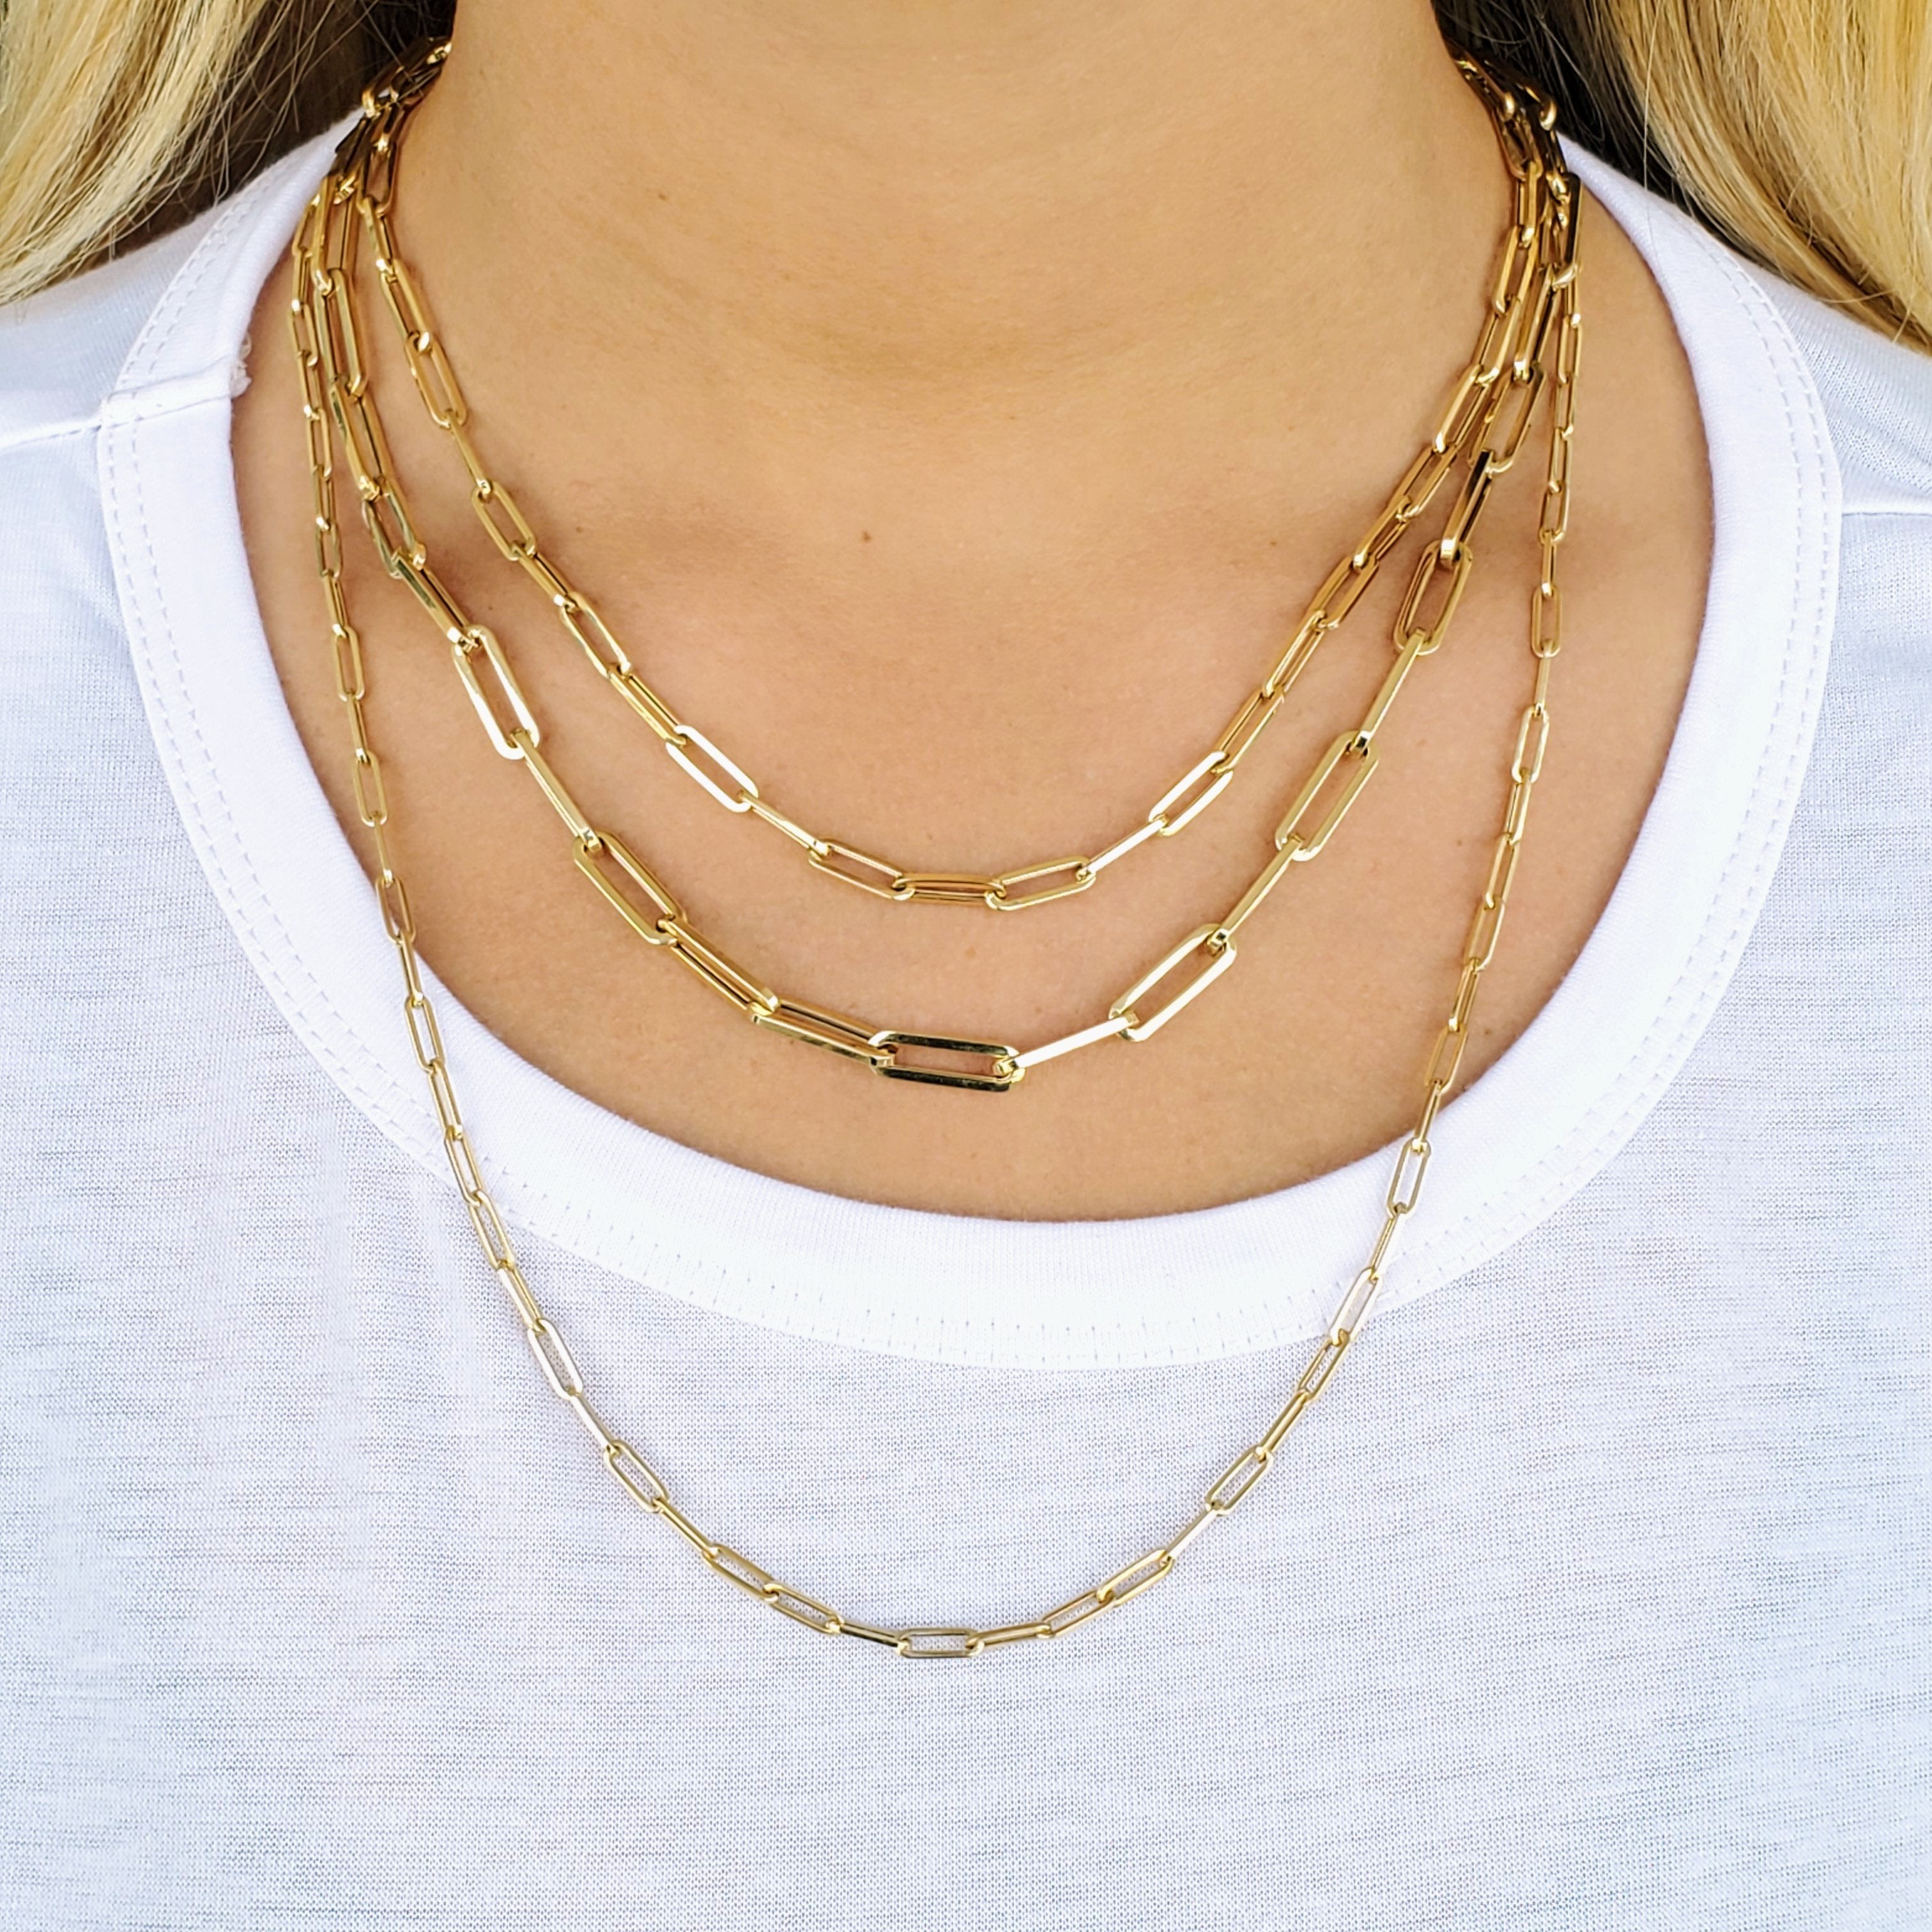 Paper Clip Link Chain 14K Gold Necklace